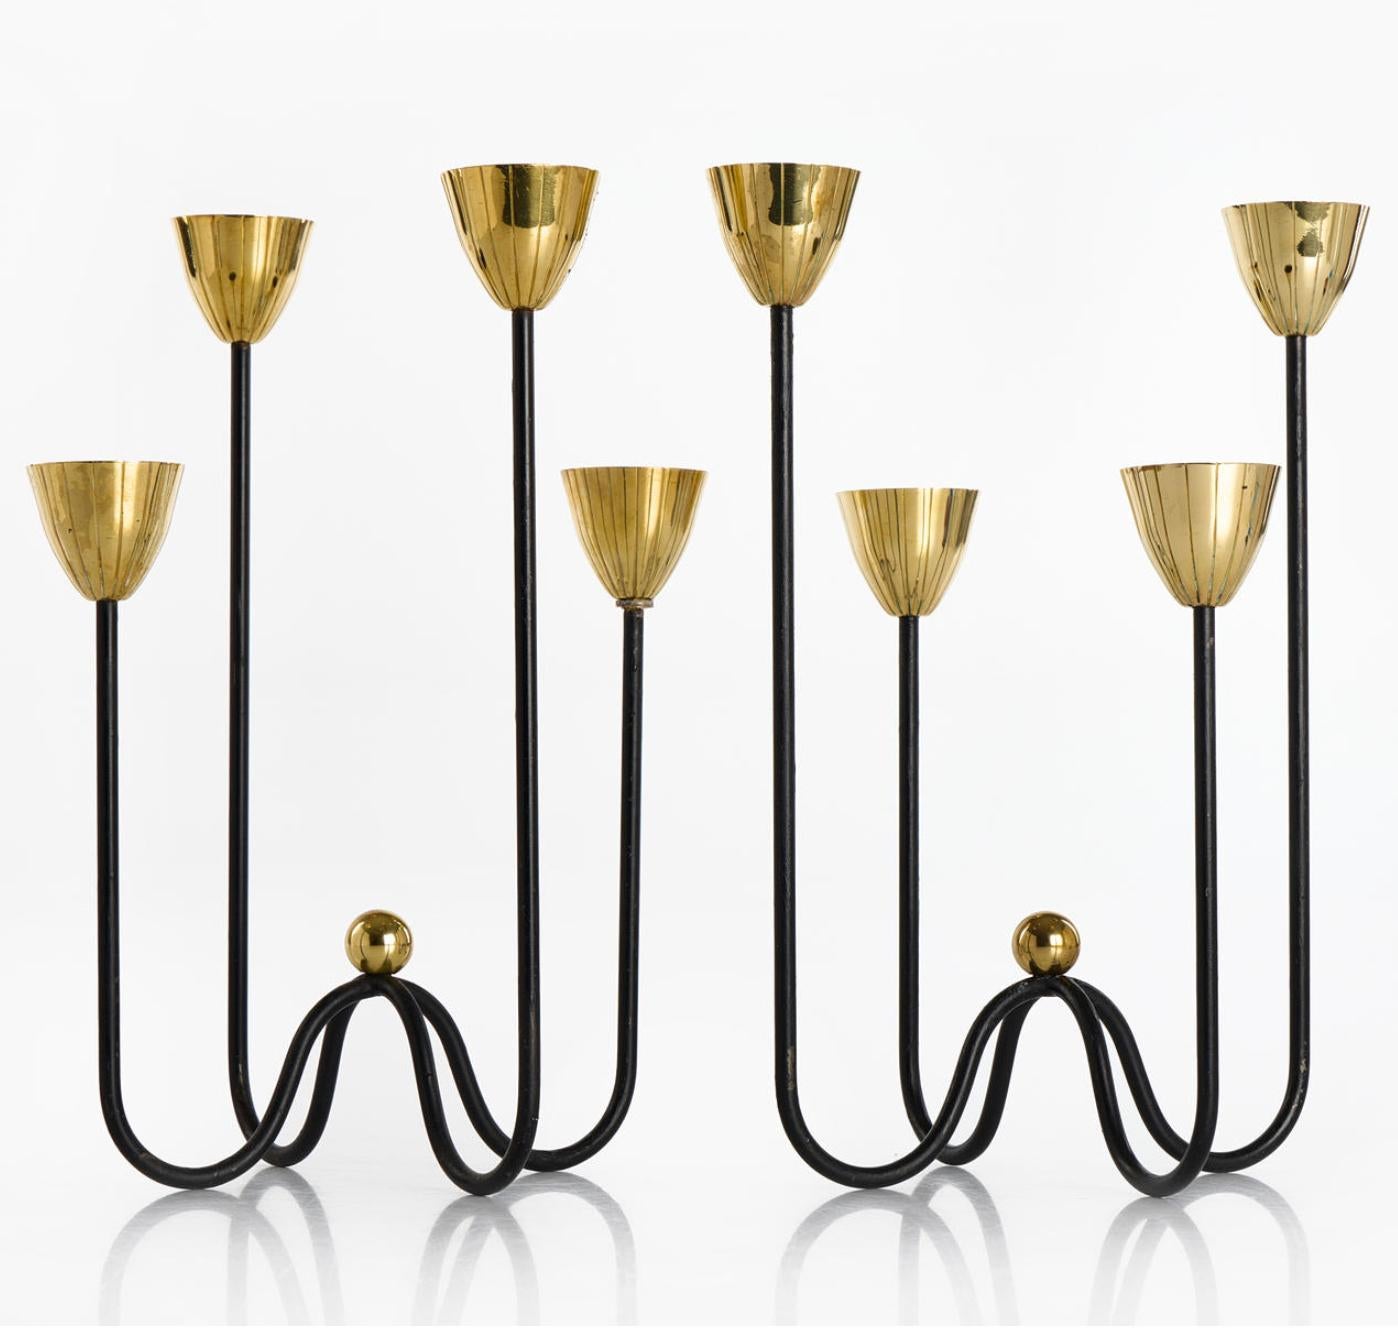 A pair of candleholders by GUNNAR ANDER for Ystad Metall, 1950s. Black lacquered metal and polished brass.